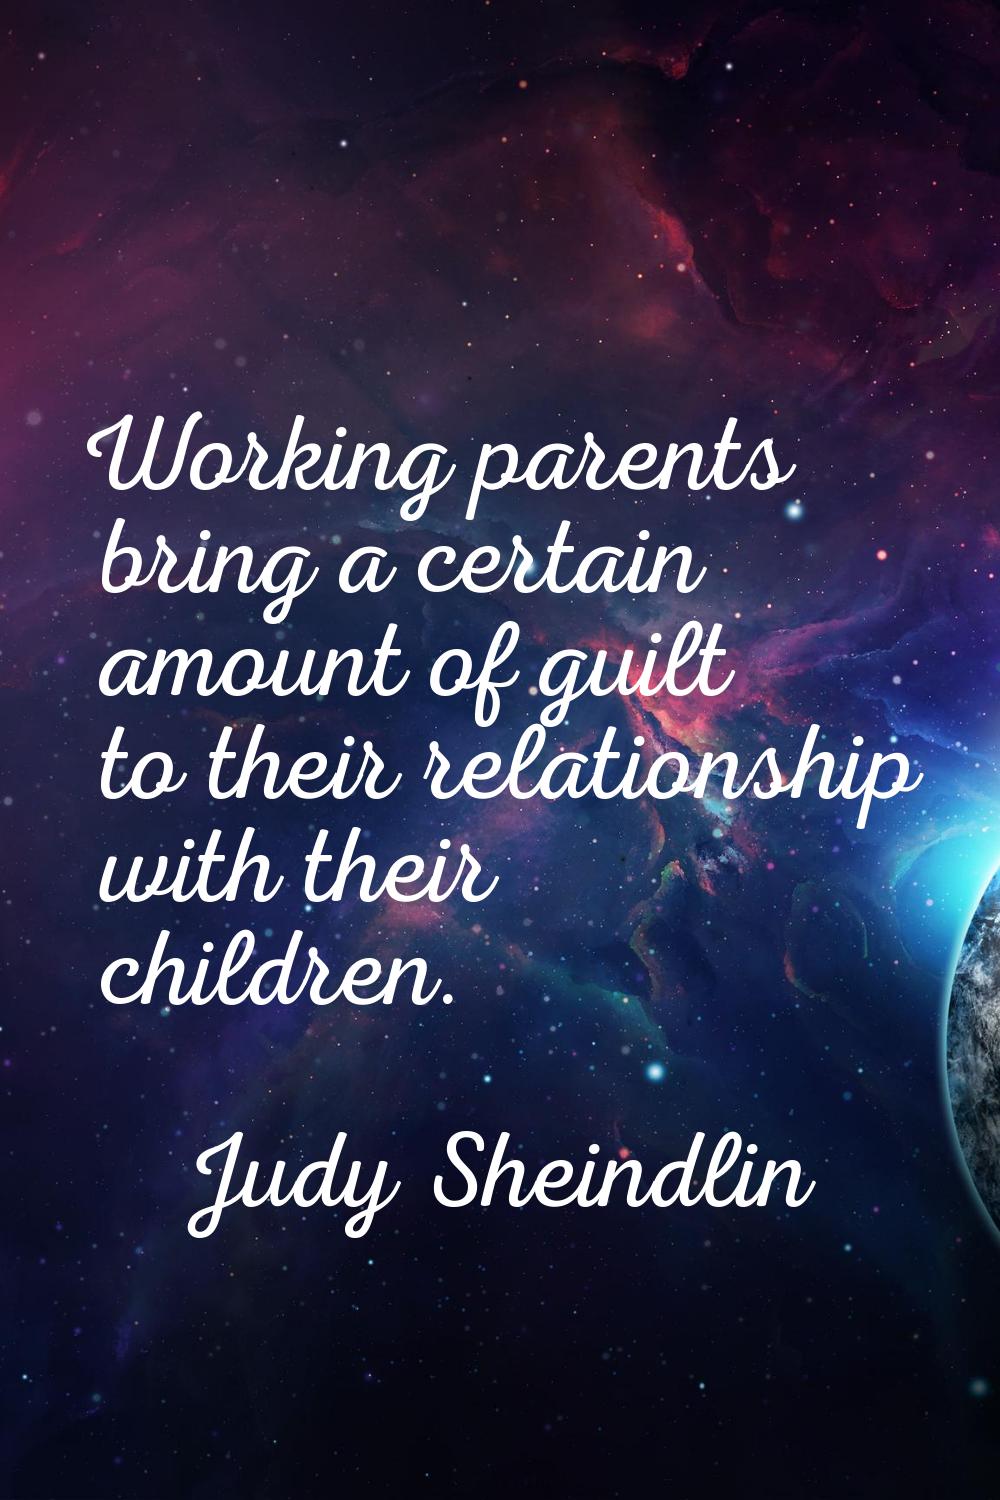 Working parents bring a certain amount of guilt to their relationship with their children.